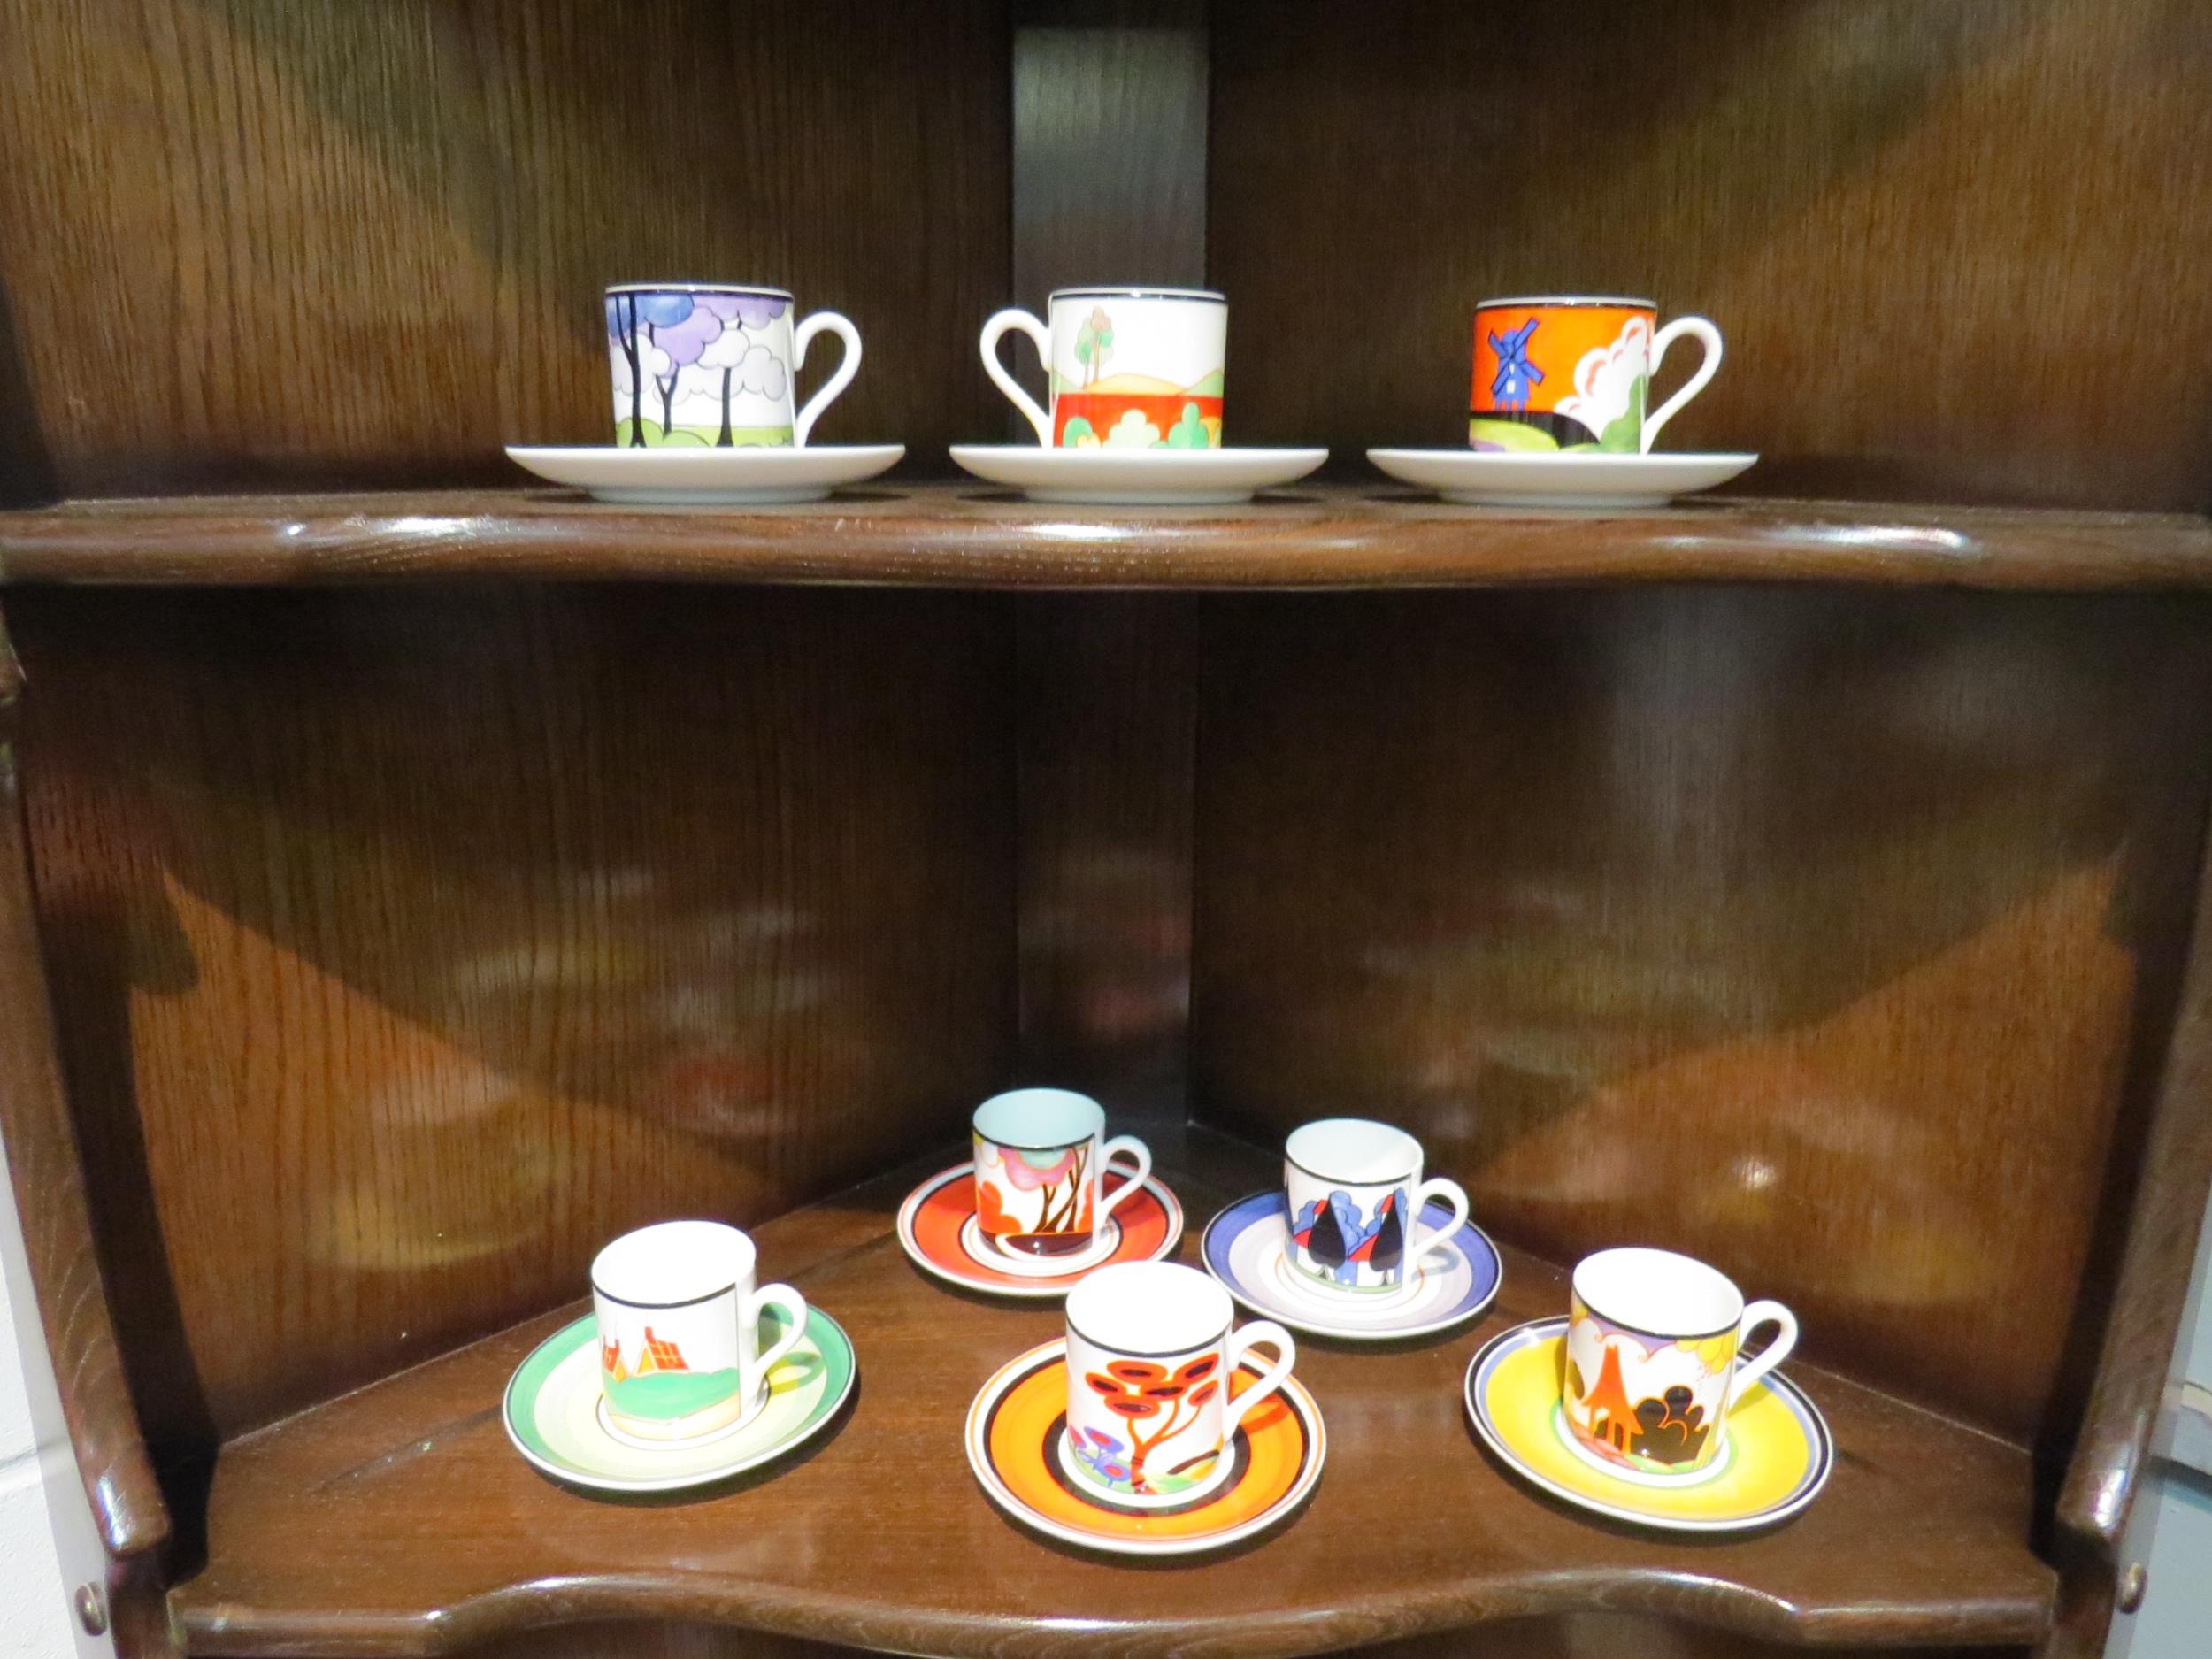 A Wedgwood Clarice Cliff harlequin coffee set consisting of coffee pot, sucrier, milk jug and - Image 2 of 3